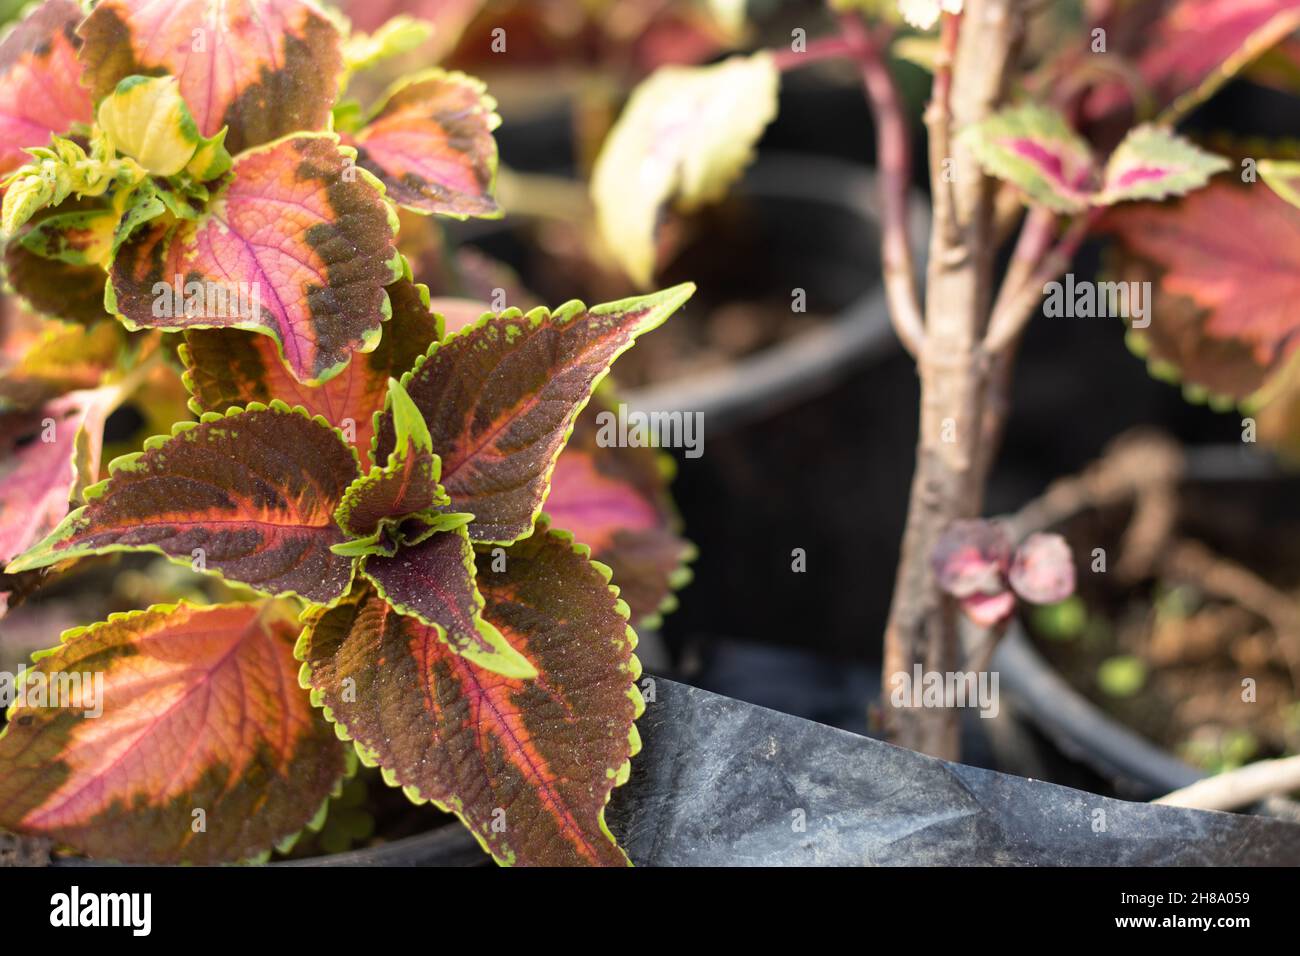 Colorful leaves Of Coleus Genus Of Lamiaceae Family With Pattern And Textured Shades Of Purple, Red, Orange, Pink, Green And Yellow Stock Photo